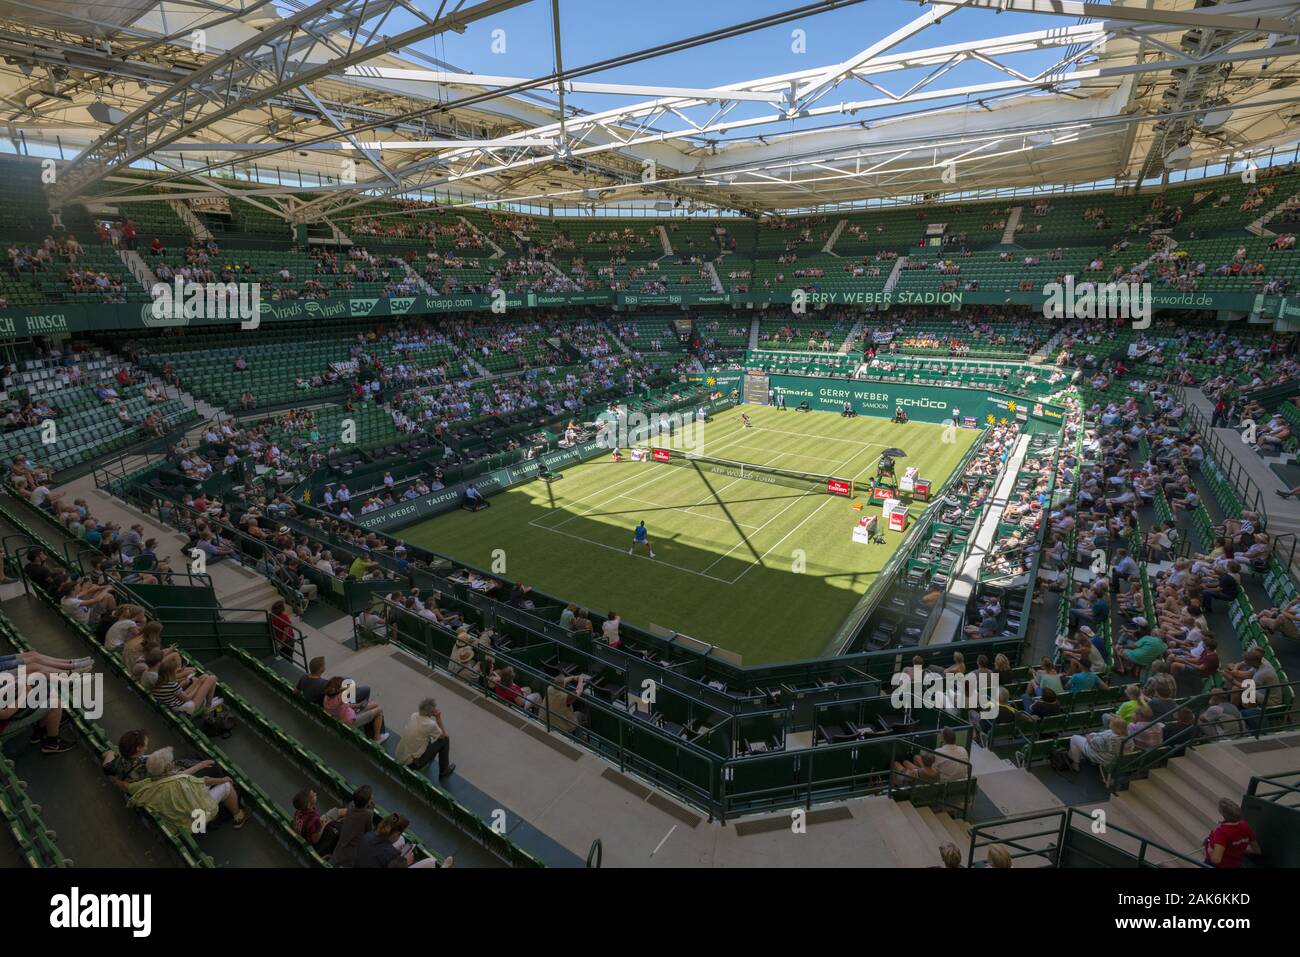 Gerry weber stadion hi-res stock photography and images - Alamy